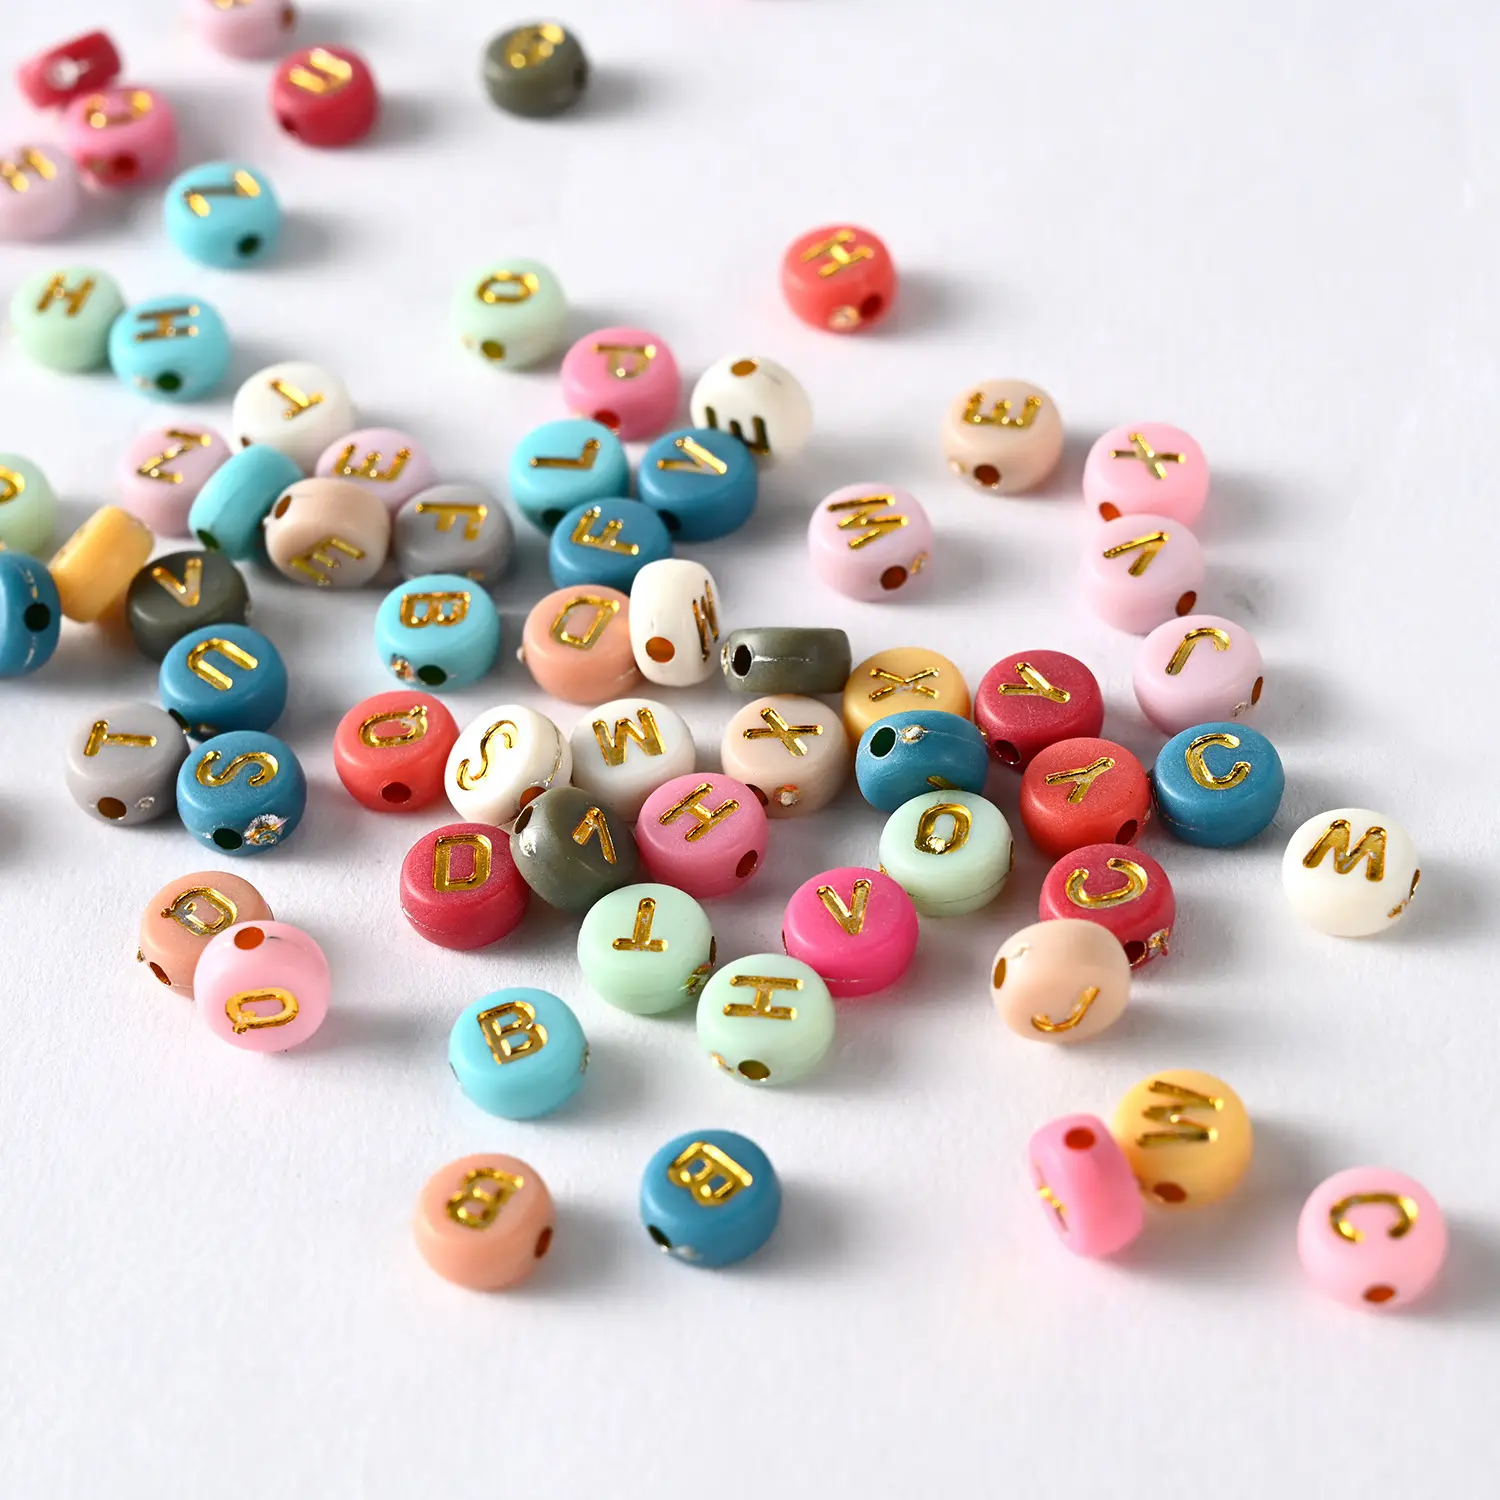 4 * 7 Round Letter Beads DIY Jewelry Accessories Handmade Beading Materials Acrylic Beads Wholesale